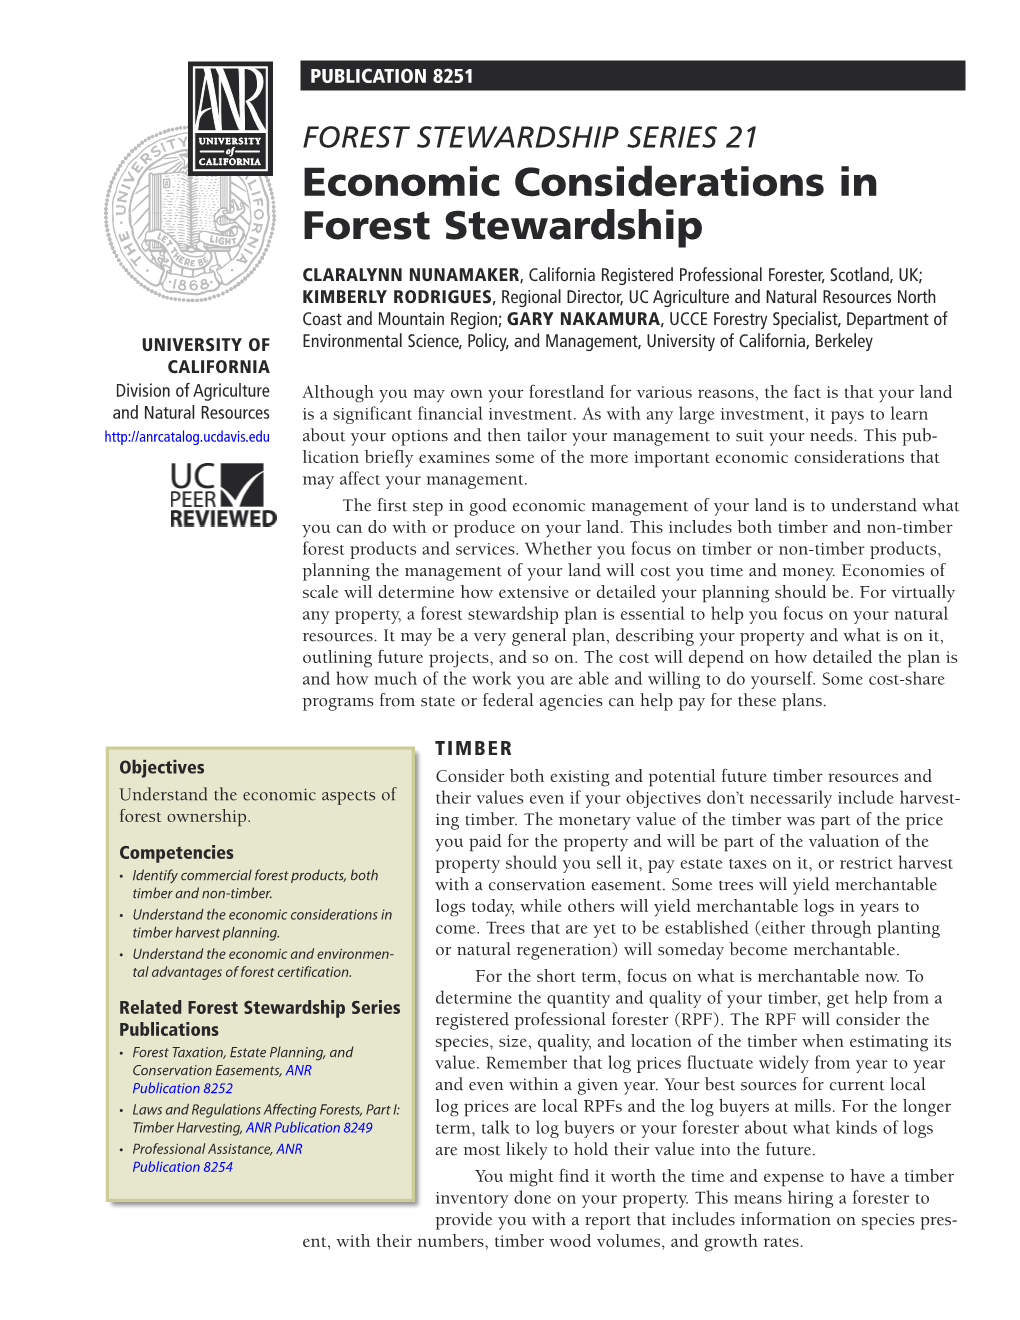 Economic Considerations in Forest Stewardship